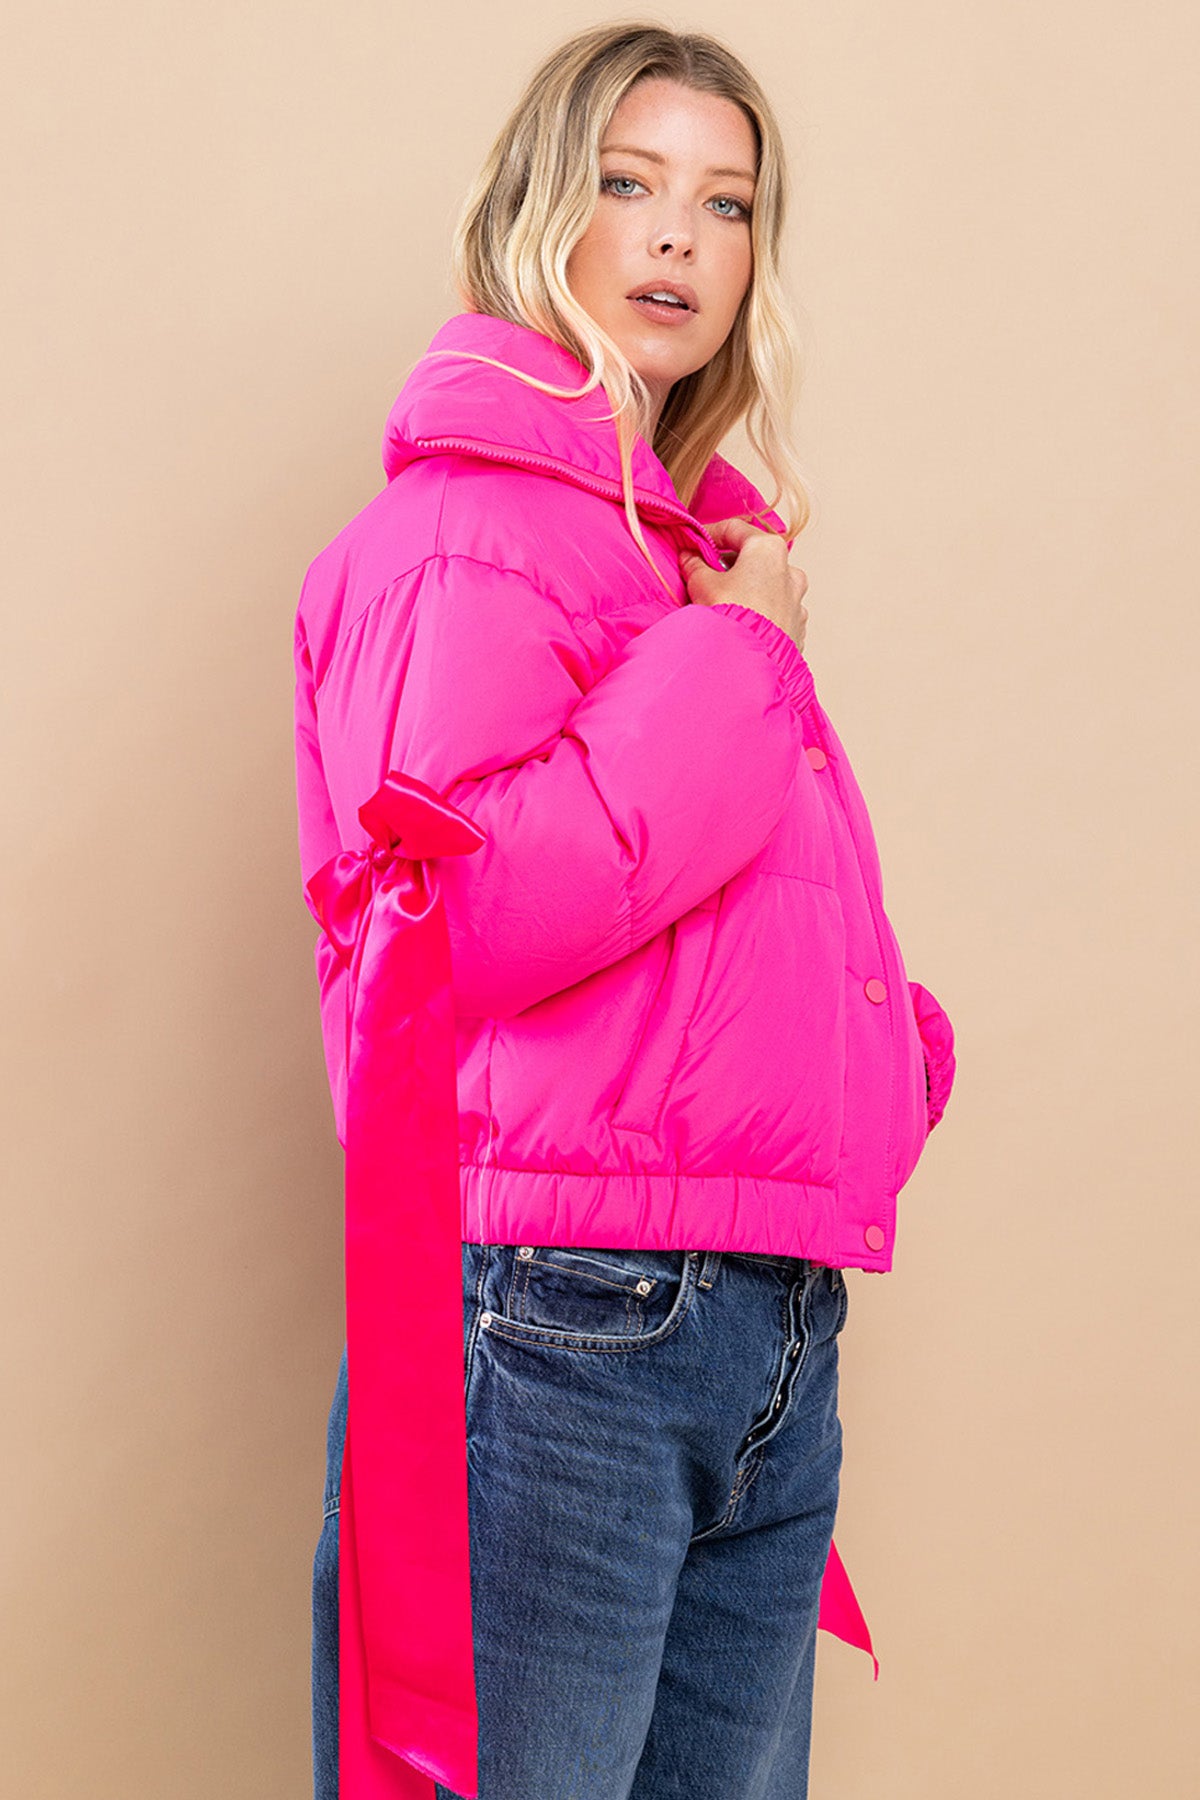 Collared, puffer jacket in fuchsia  with bow knot elbow string.  side view